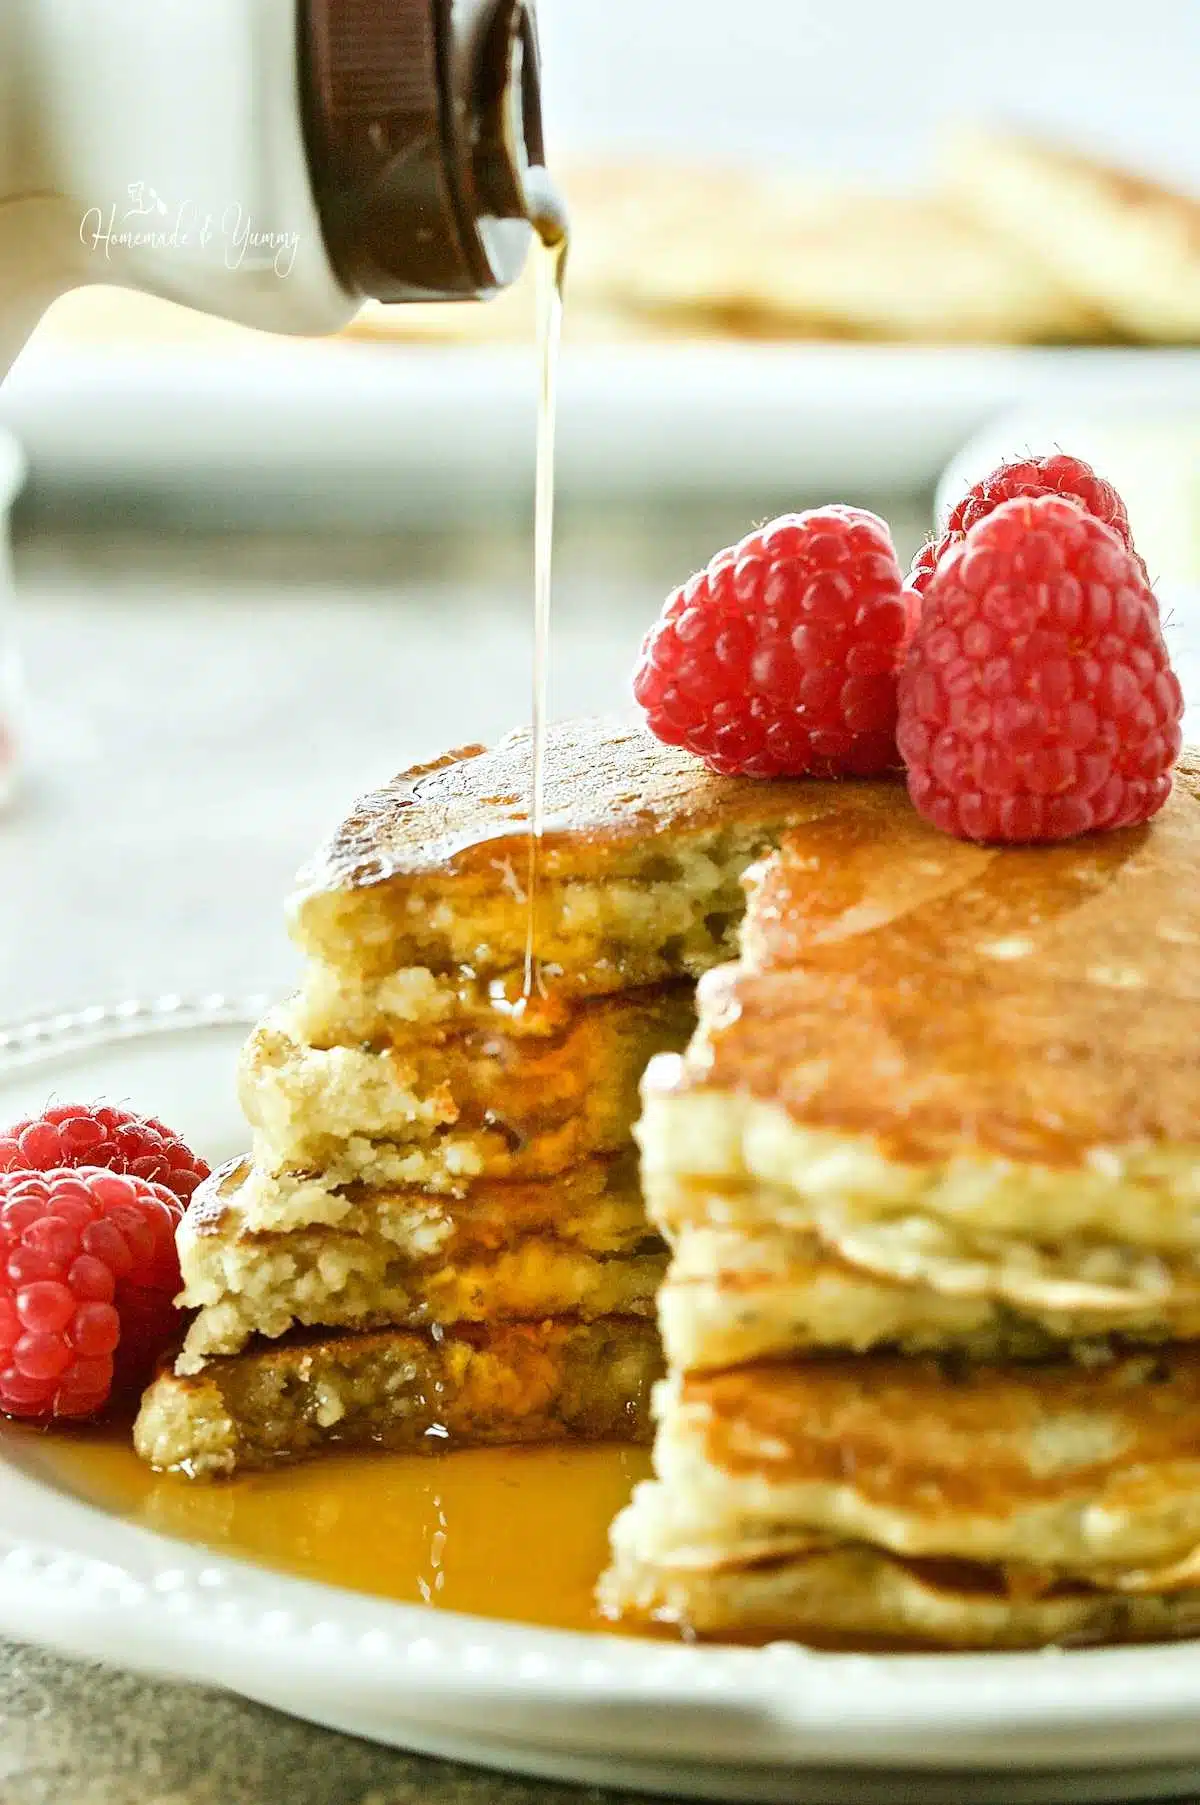 Syrup getting poured over a stack of oatmeal pancakes, topped with raspberries.